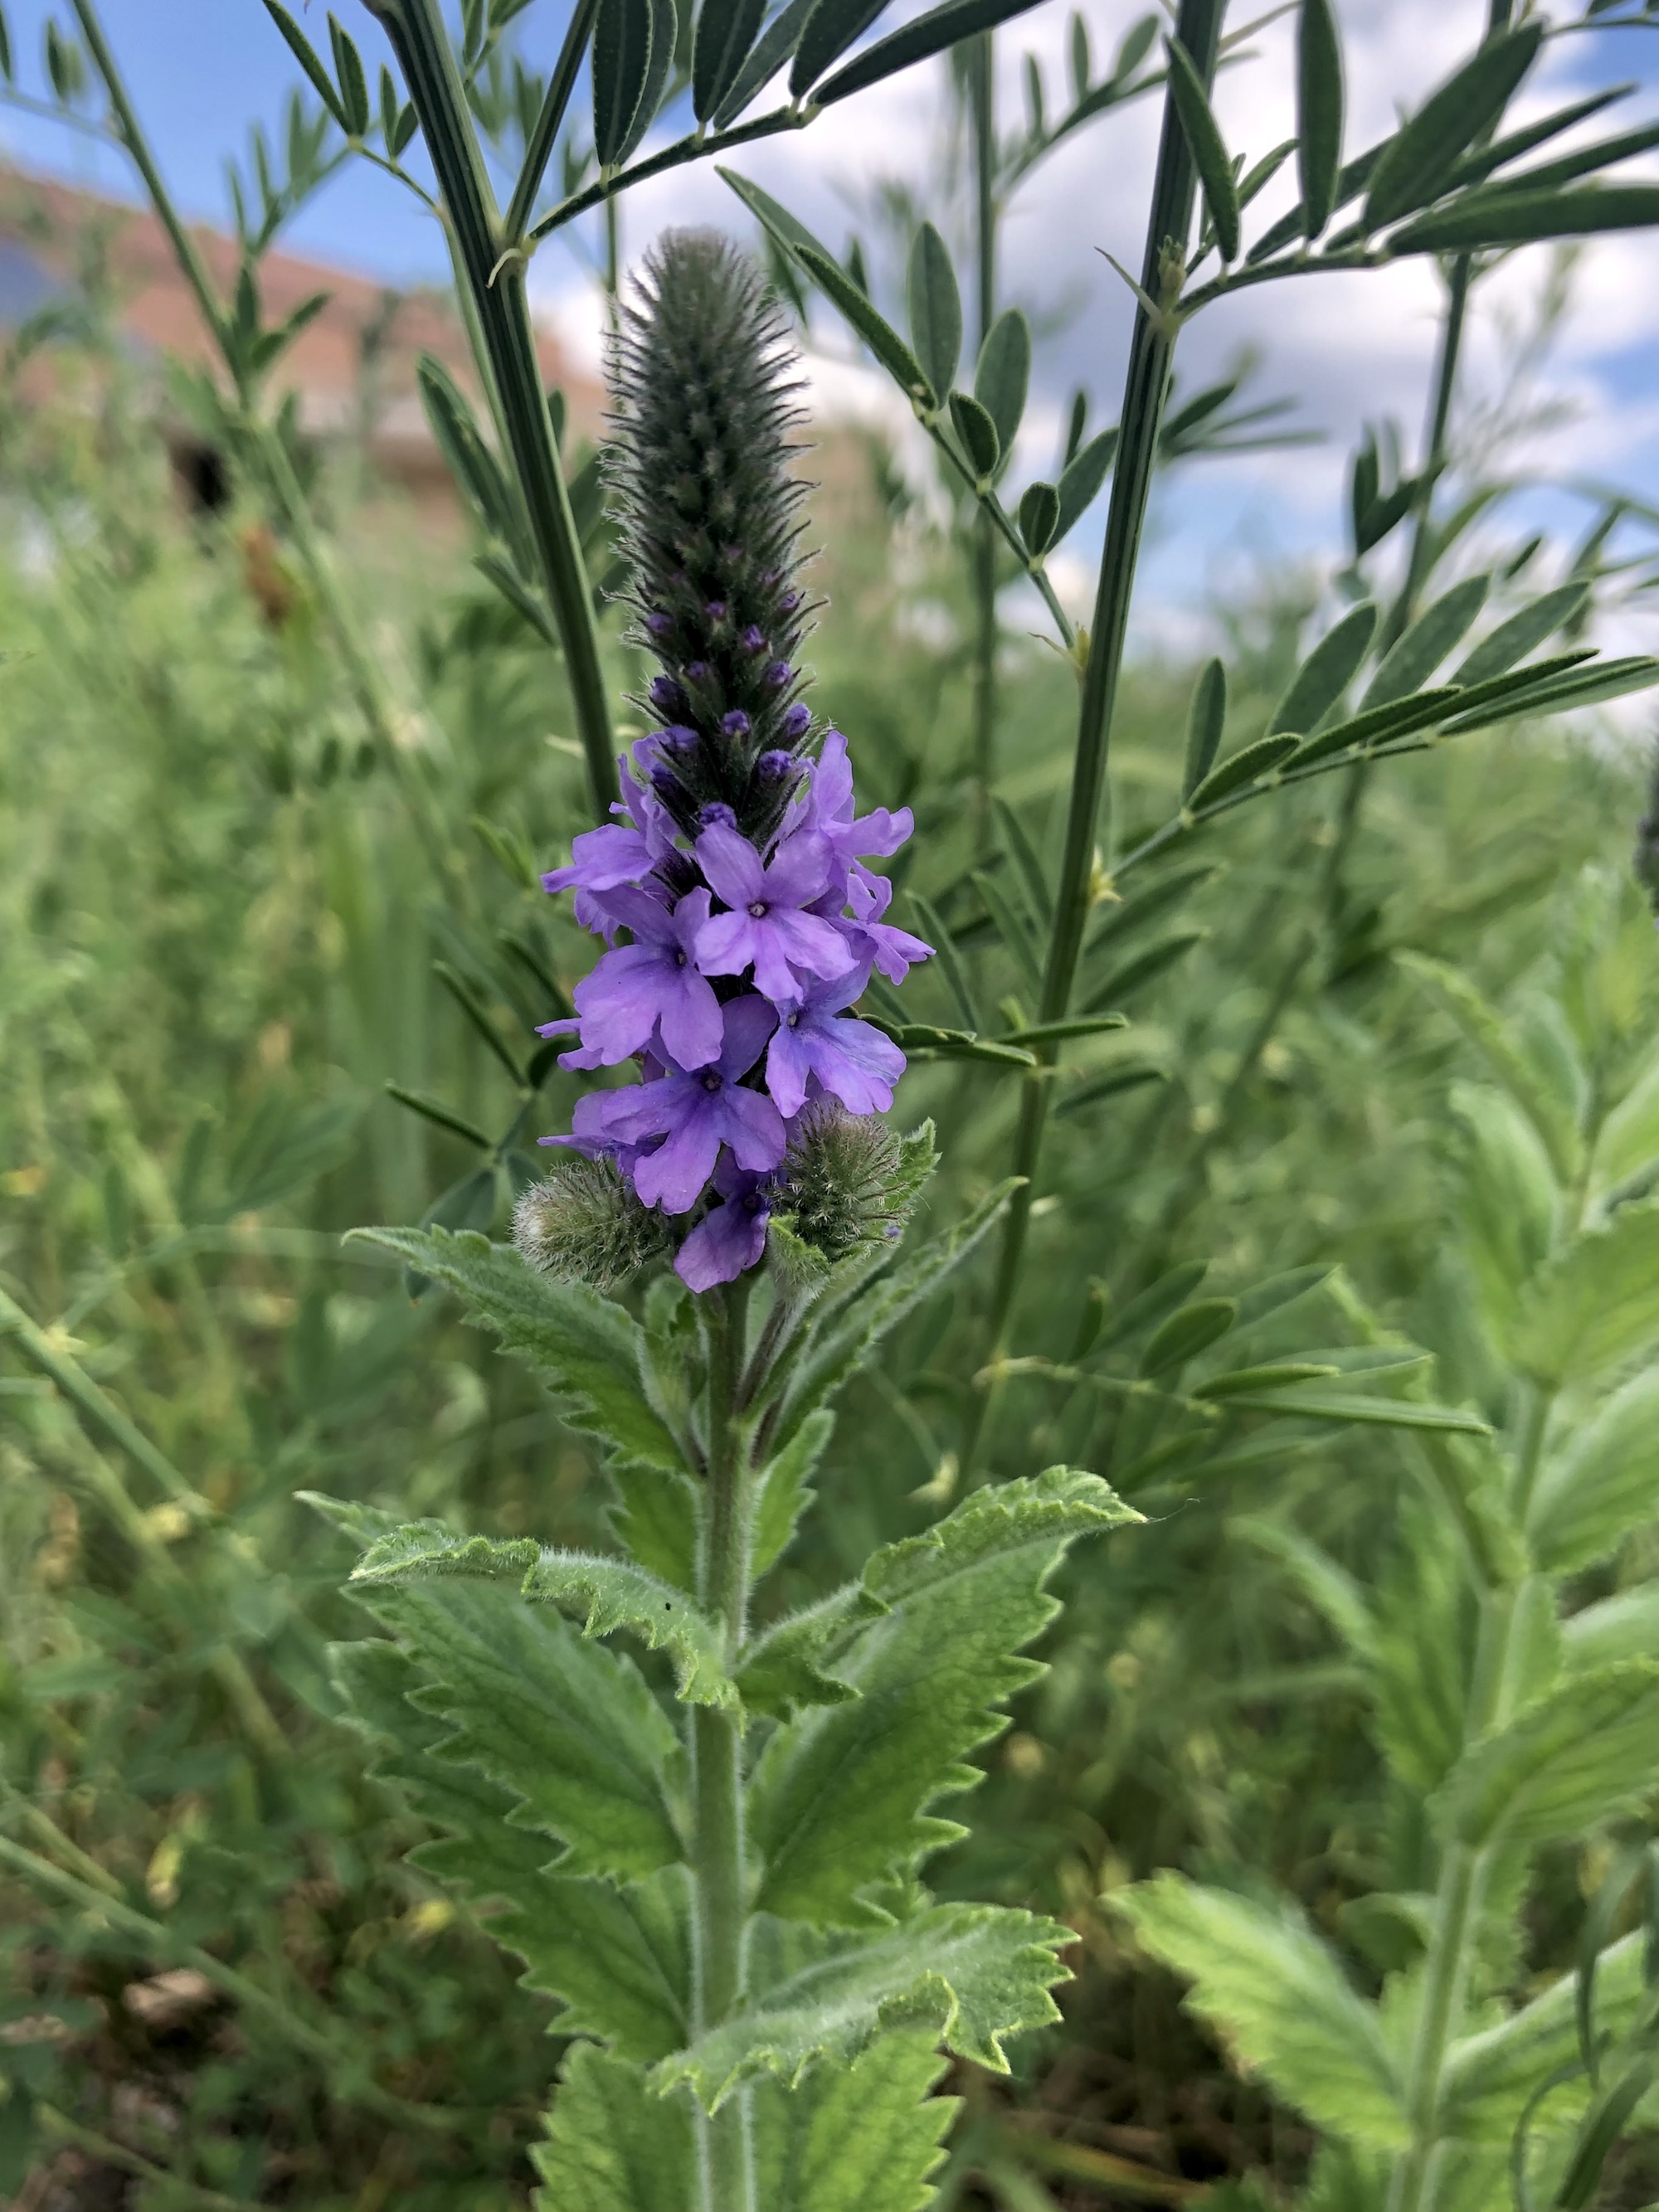 Hoary Vervain next to the UW Arboretum Visitors Center parking lot on June 15, 2021.